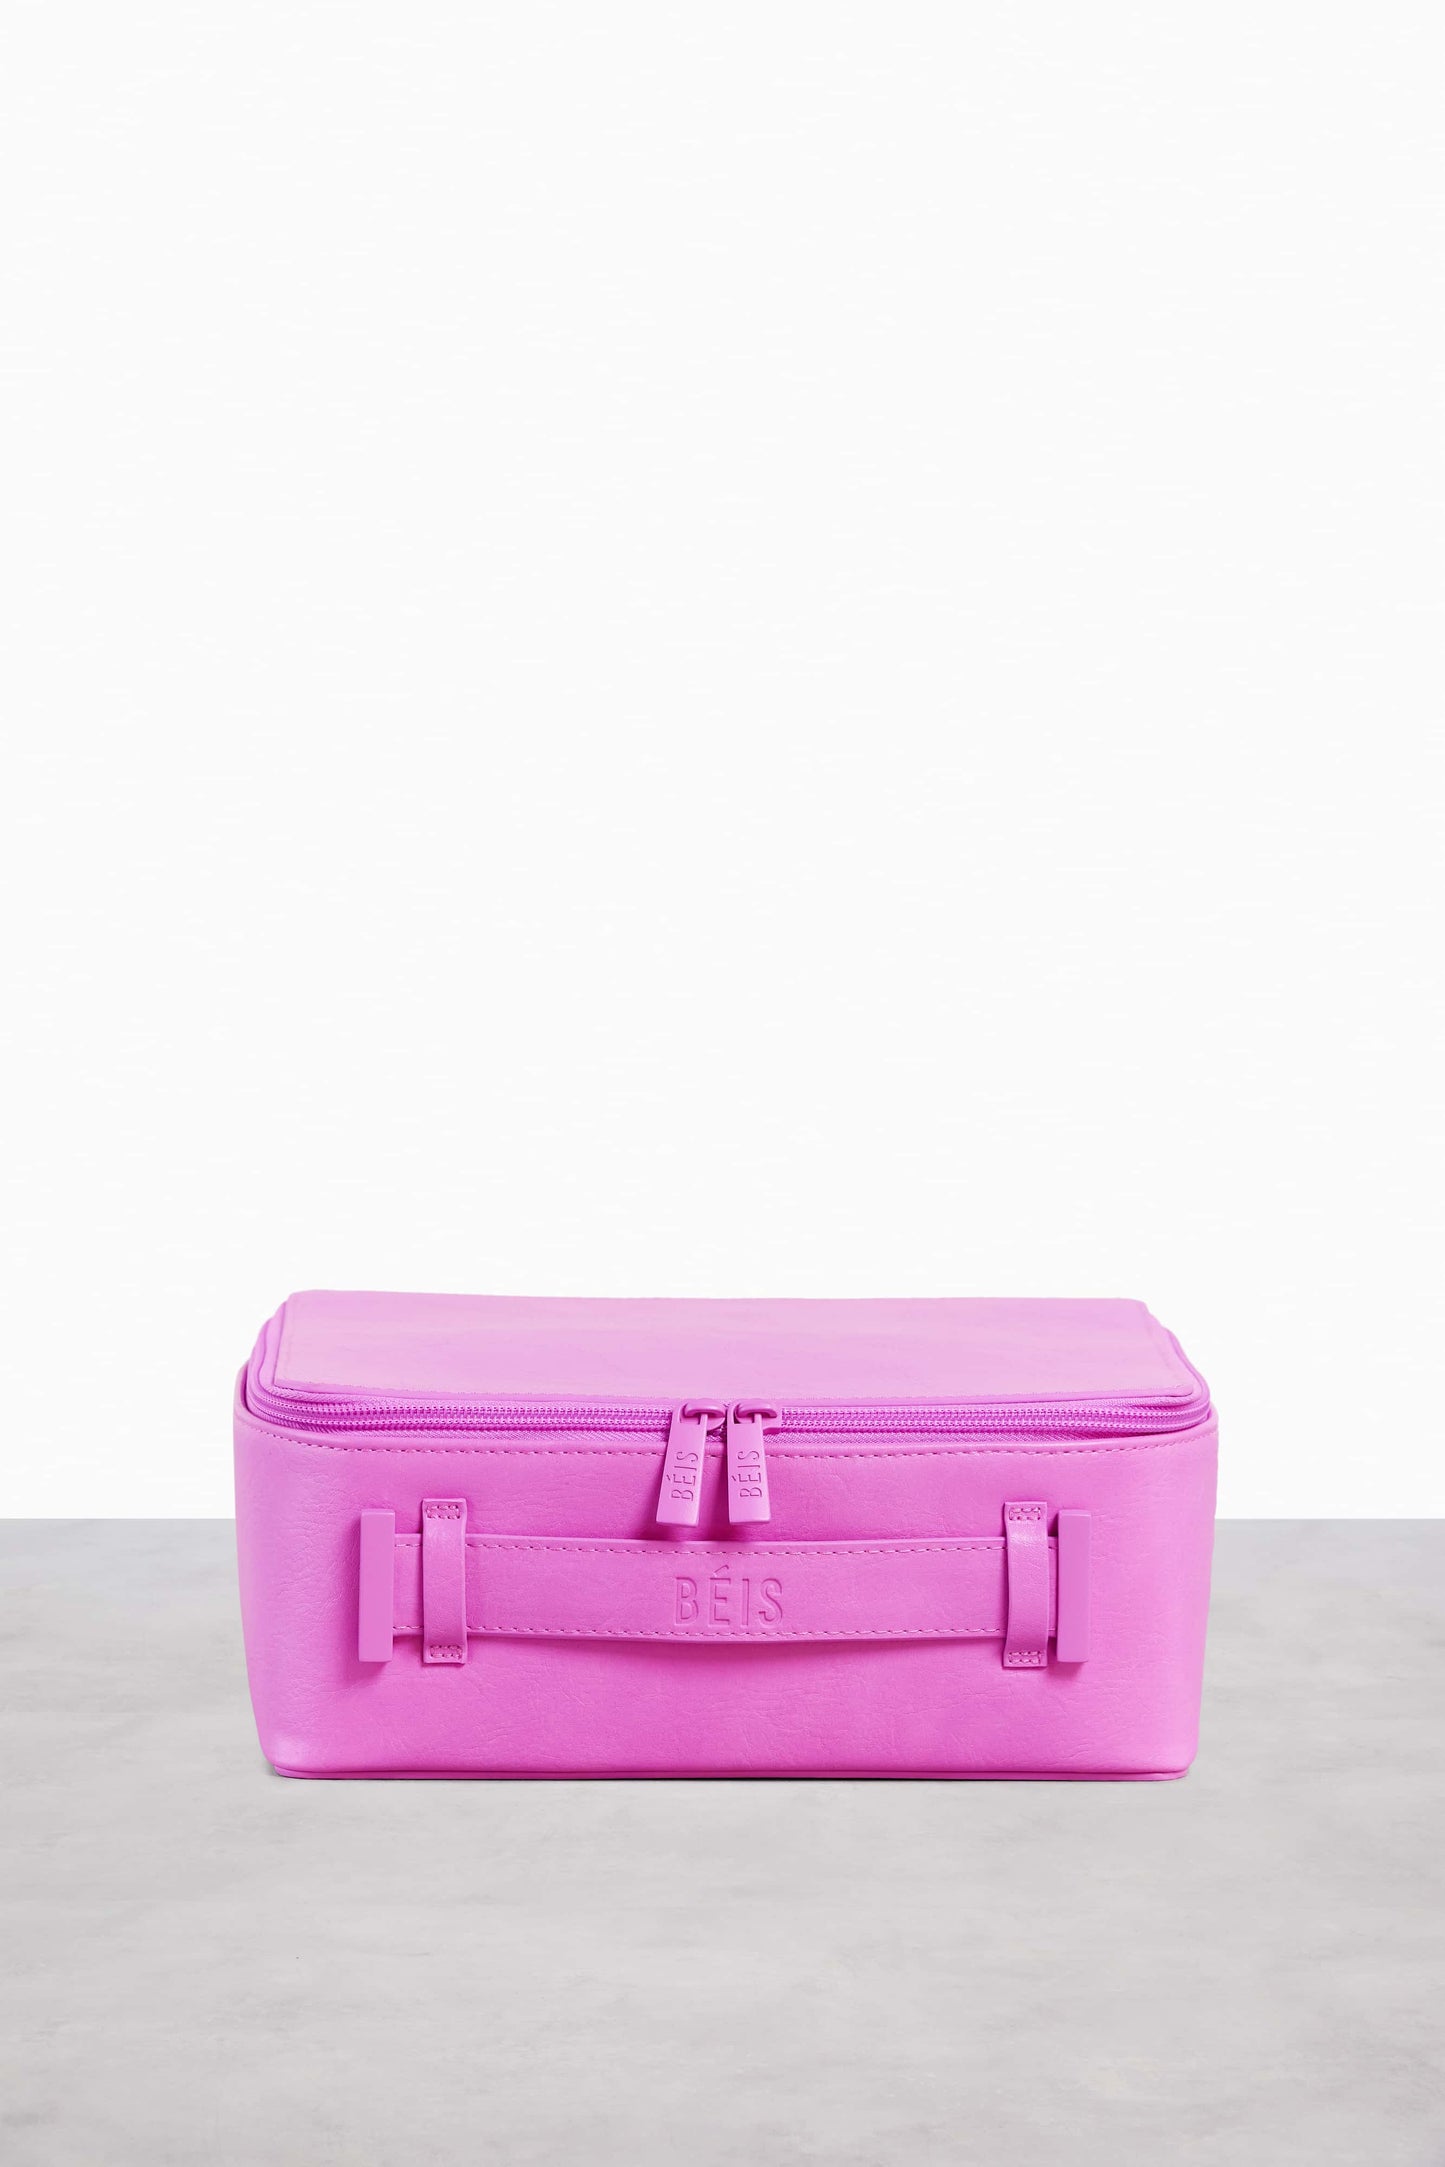 The Cosmetic Case in Berry